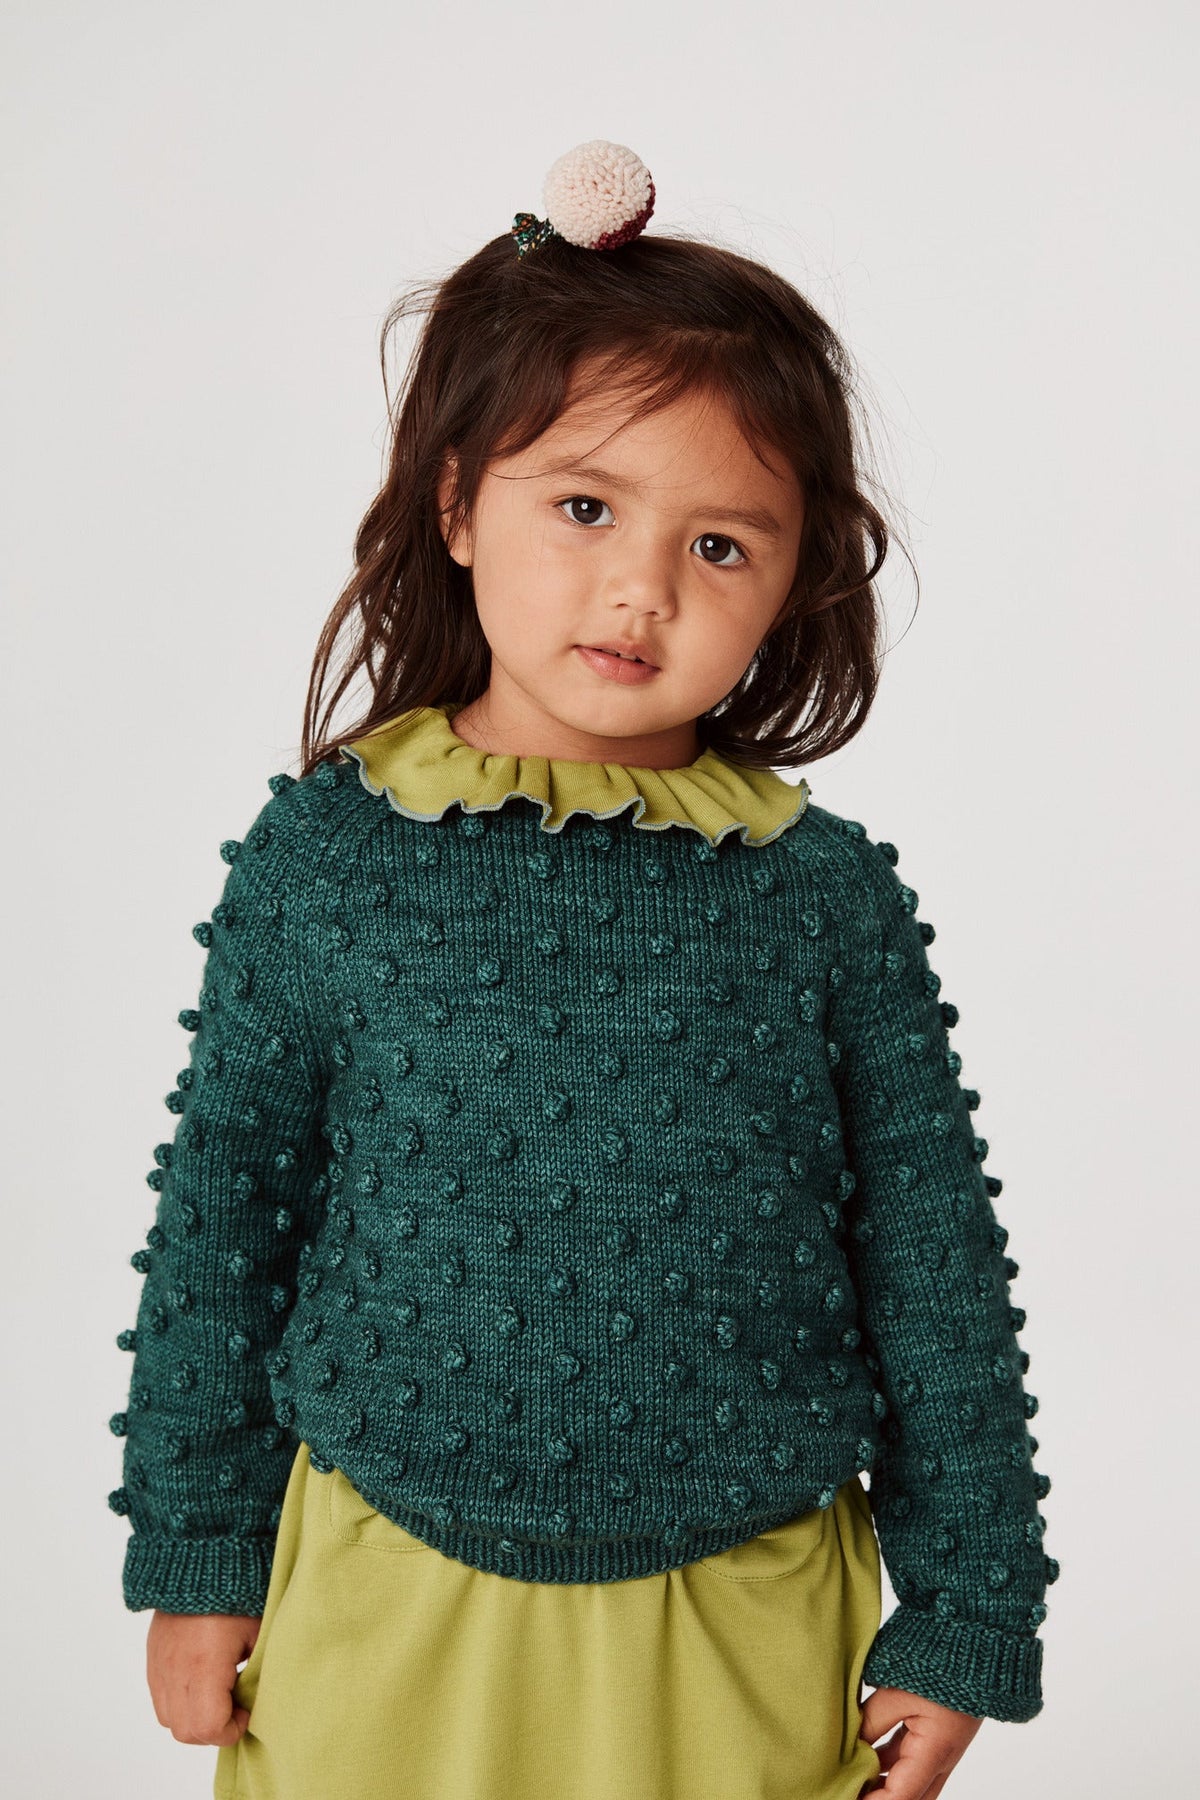 Popcorn Sweater - Peacock+Model is 41 inches tall, 38lbs, wearing a size 4-5y